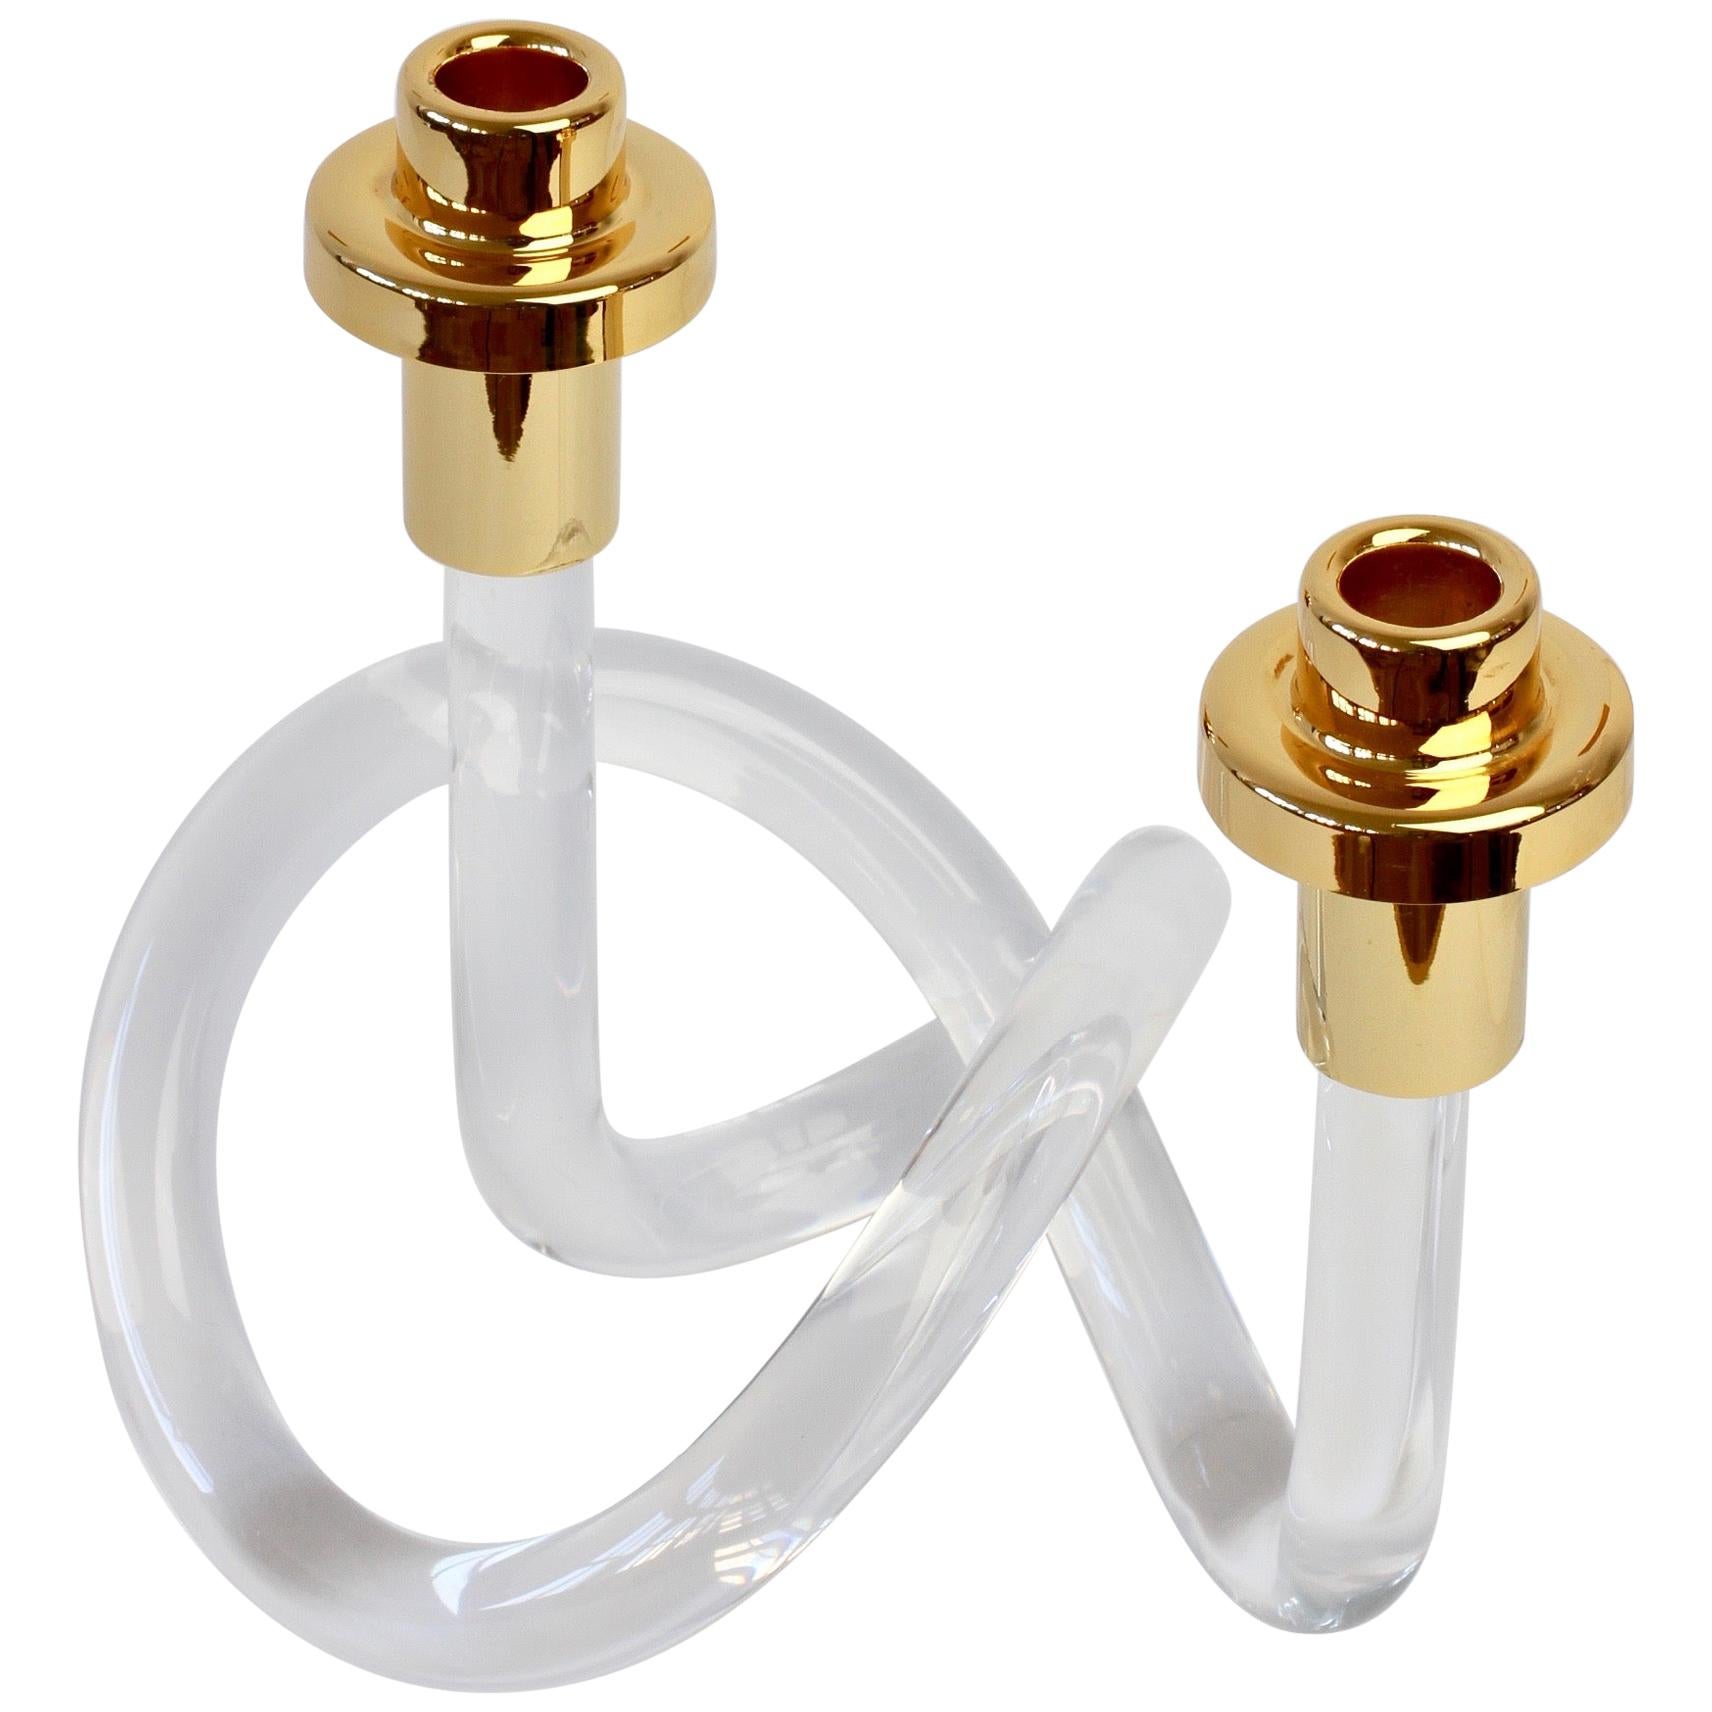 Gold and Lucite Twisted Pretzel Candlestick Holder/Candelabra by Dorothy Thorpe